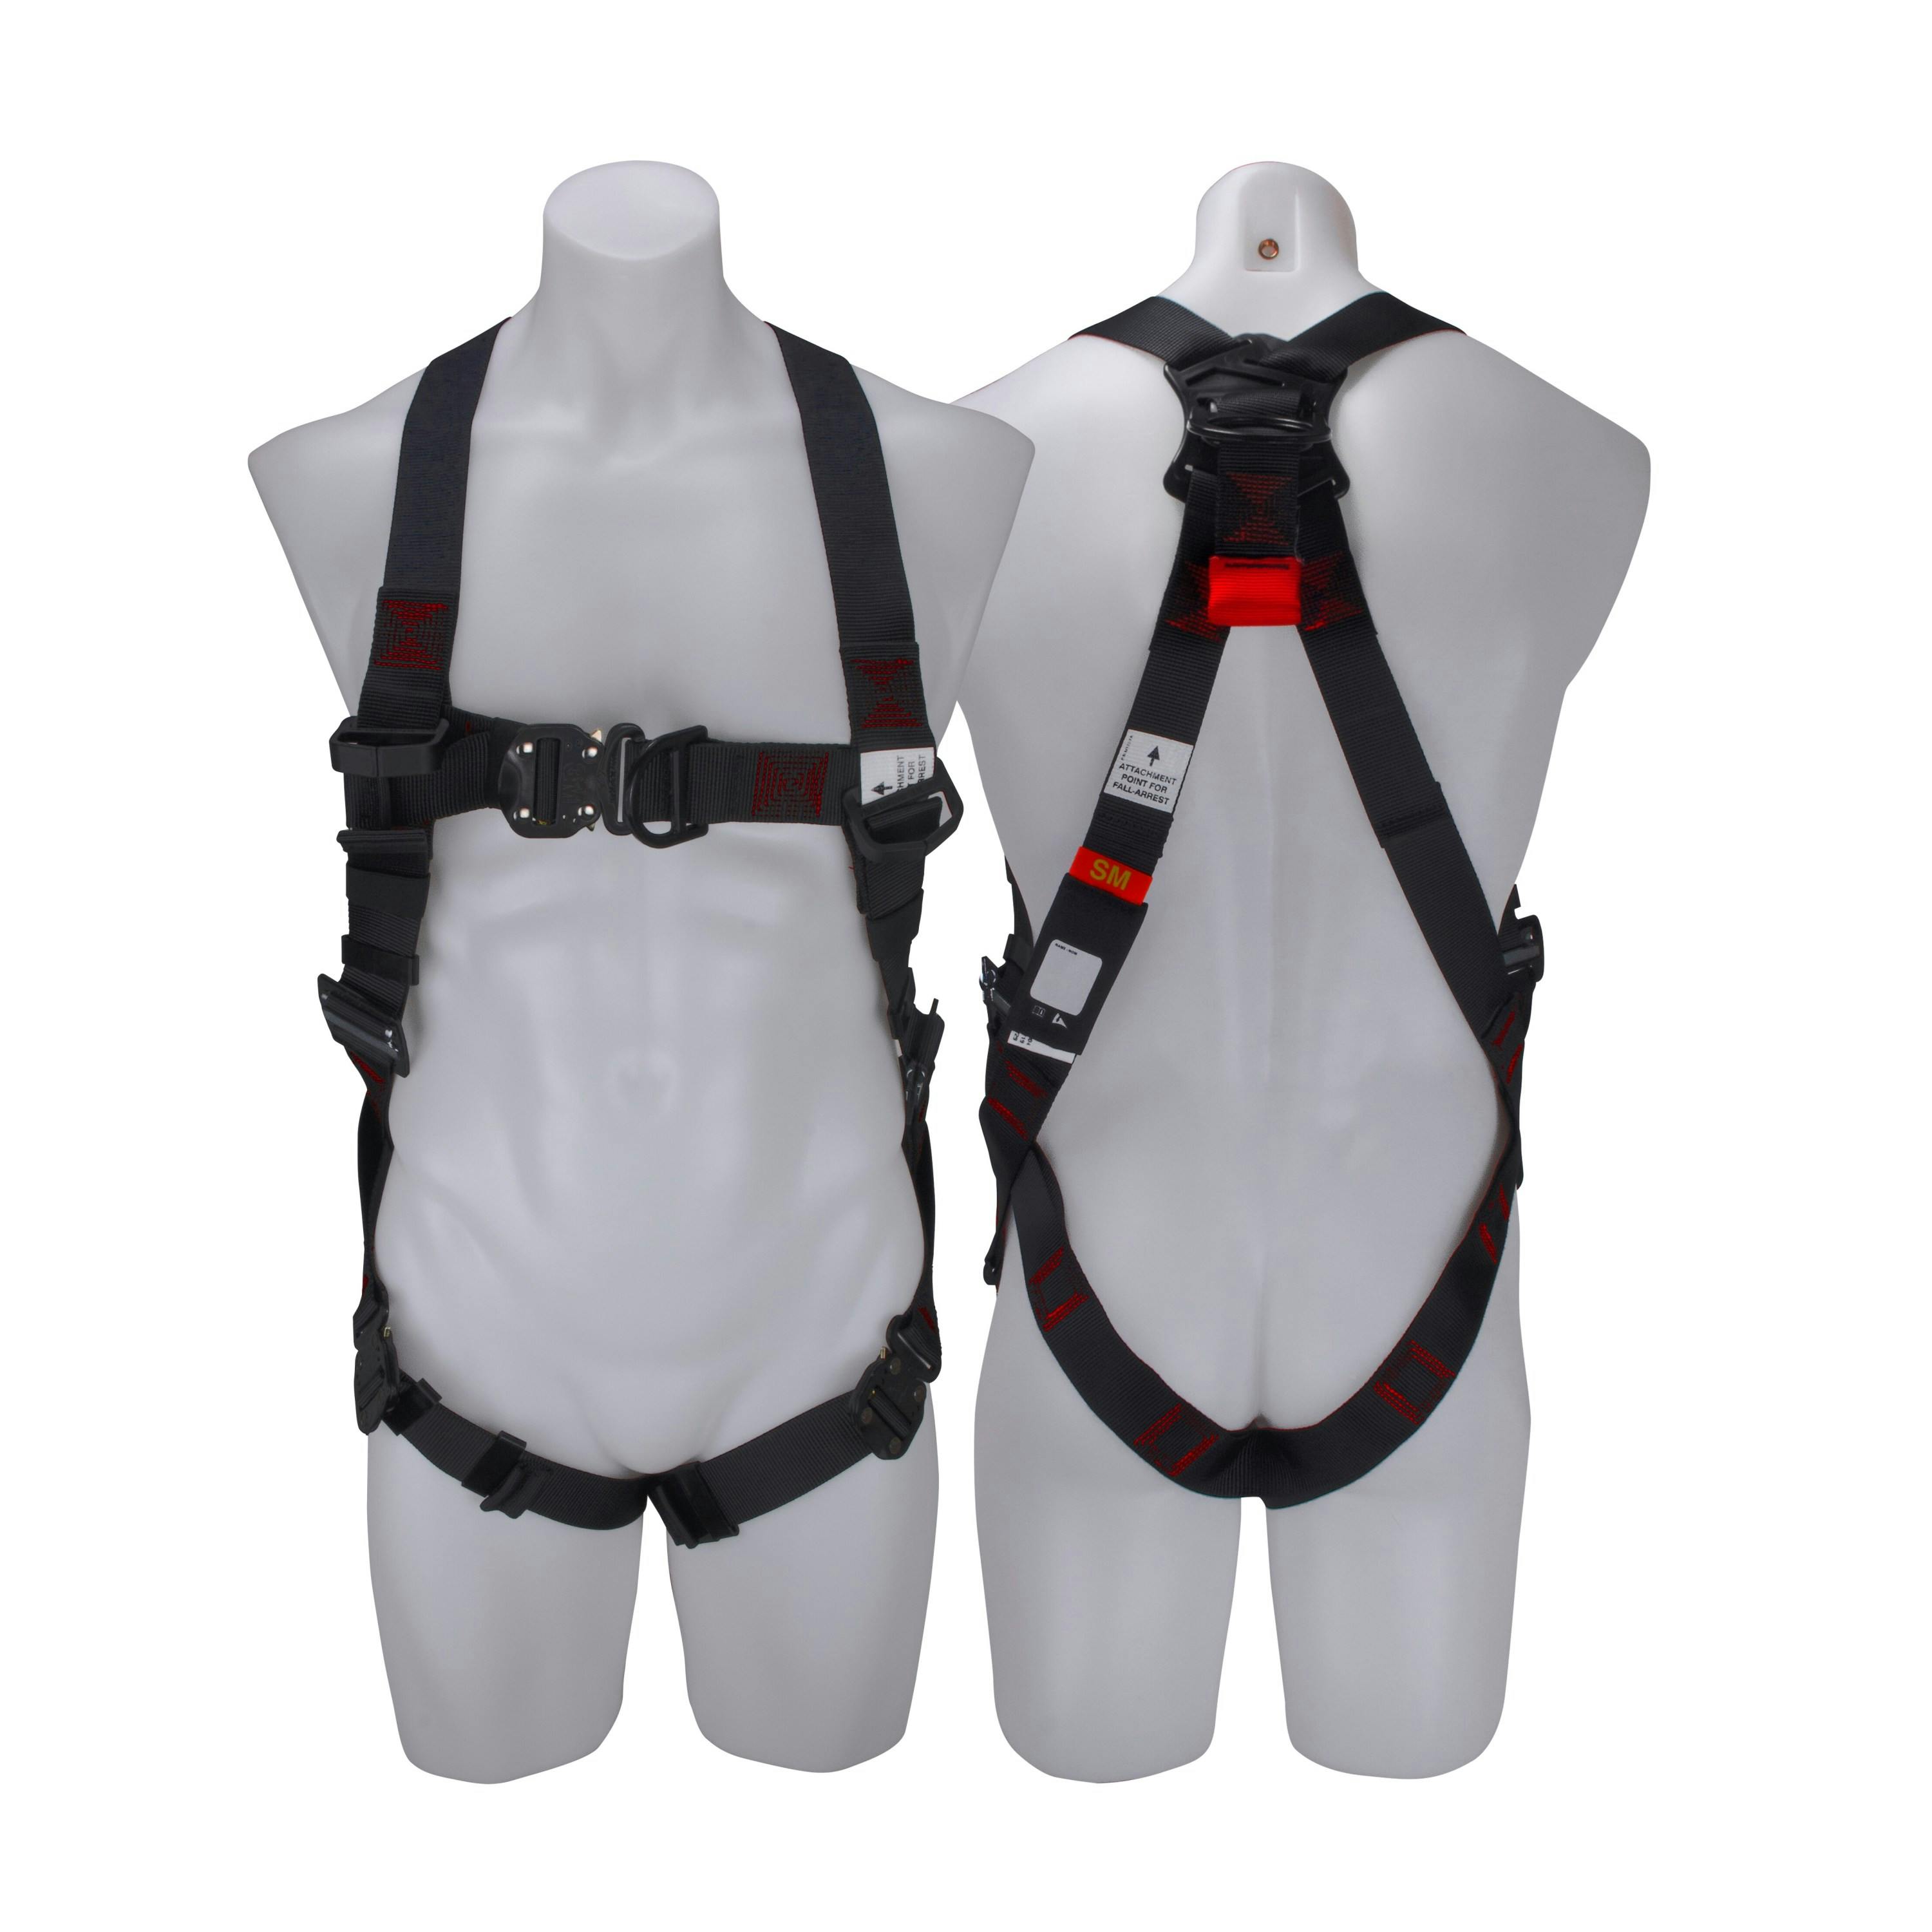 3M™ PROTECTA® X Riggers Harness 1161675, Red and Black, Extra Large, 1 EA/Case